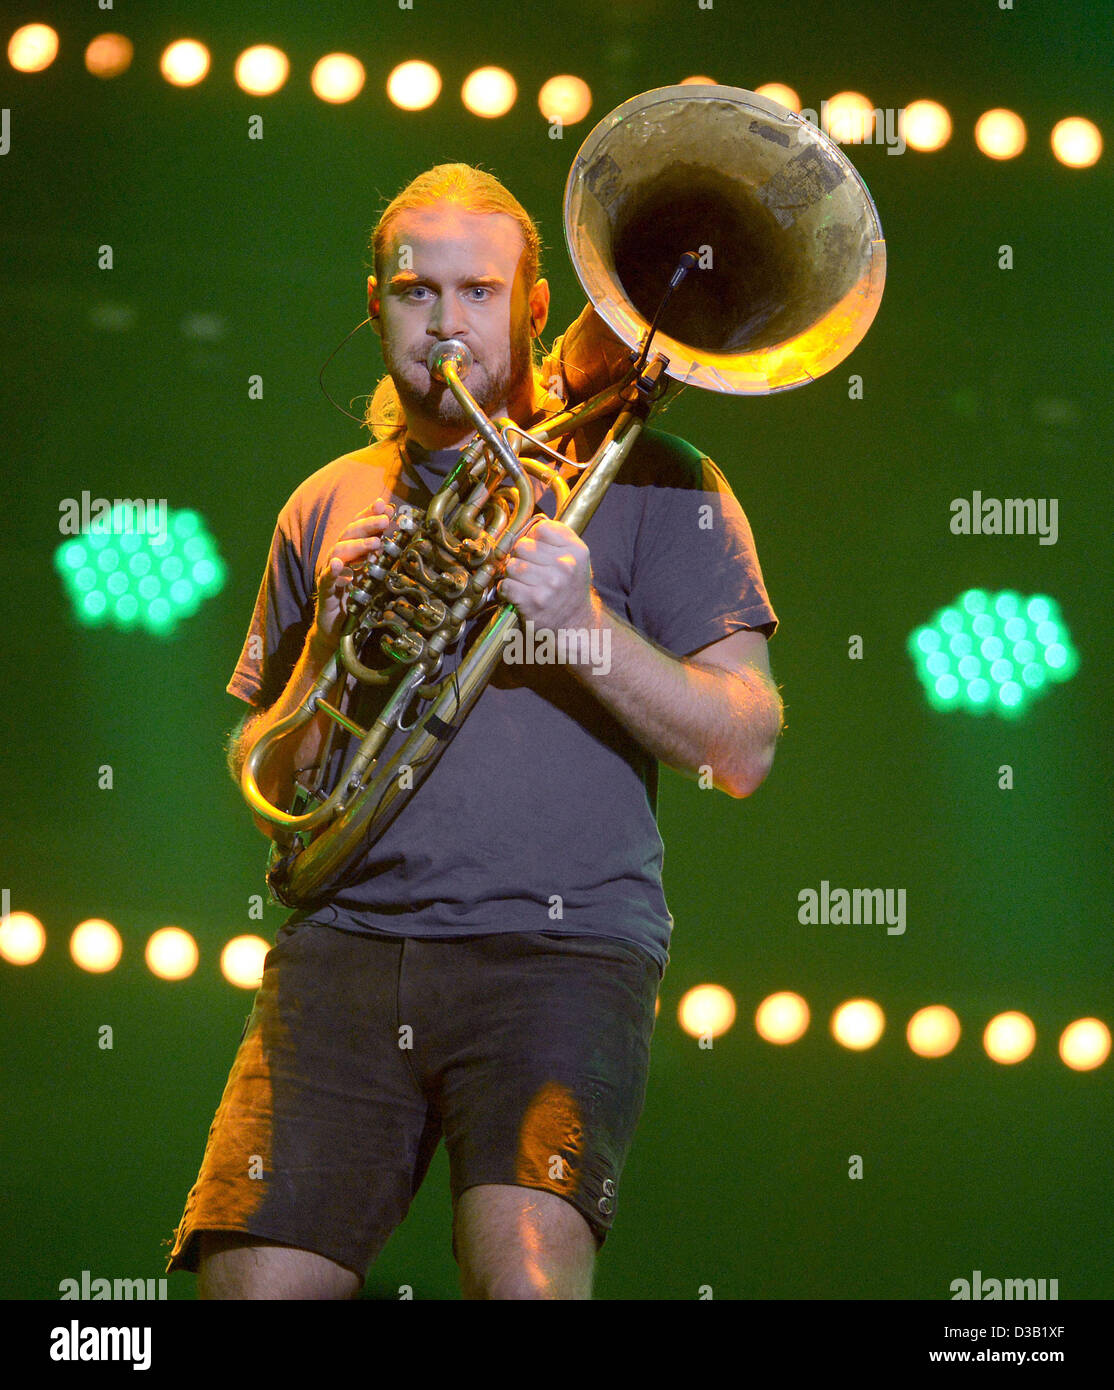 Hanover, Germany. 14th February 2013. Andreas Martin Hofmeir performs in the German trials for the 'Eurovision Song Contest 2013 - Our Song for Malmo' in Hanover, Germany. The band Cascada won and will travel to Malmo as Germany's representative. Photo: Julian Stratenschulte/dpa/Alamy Live News Stock Photo